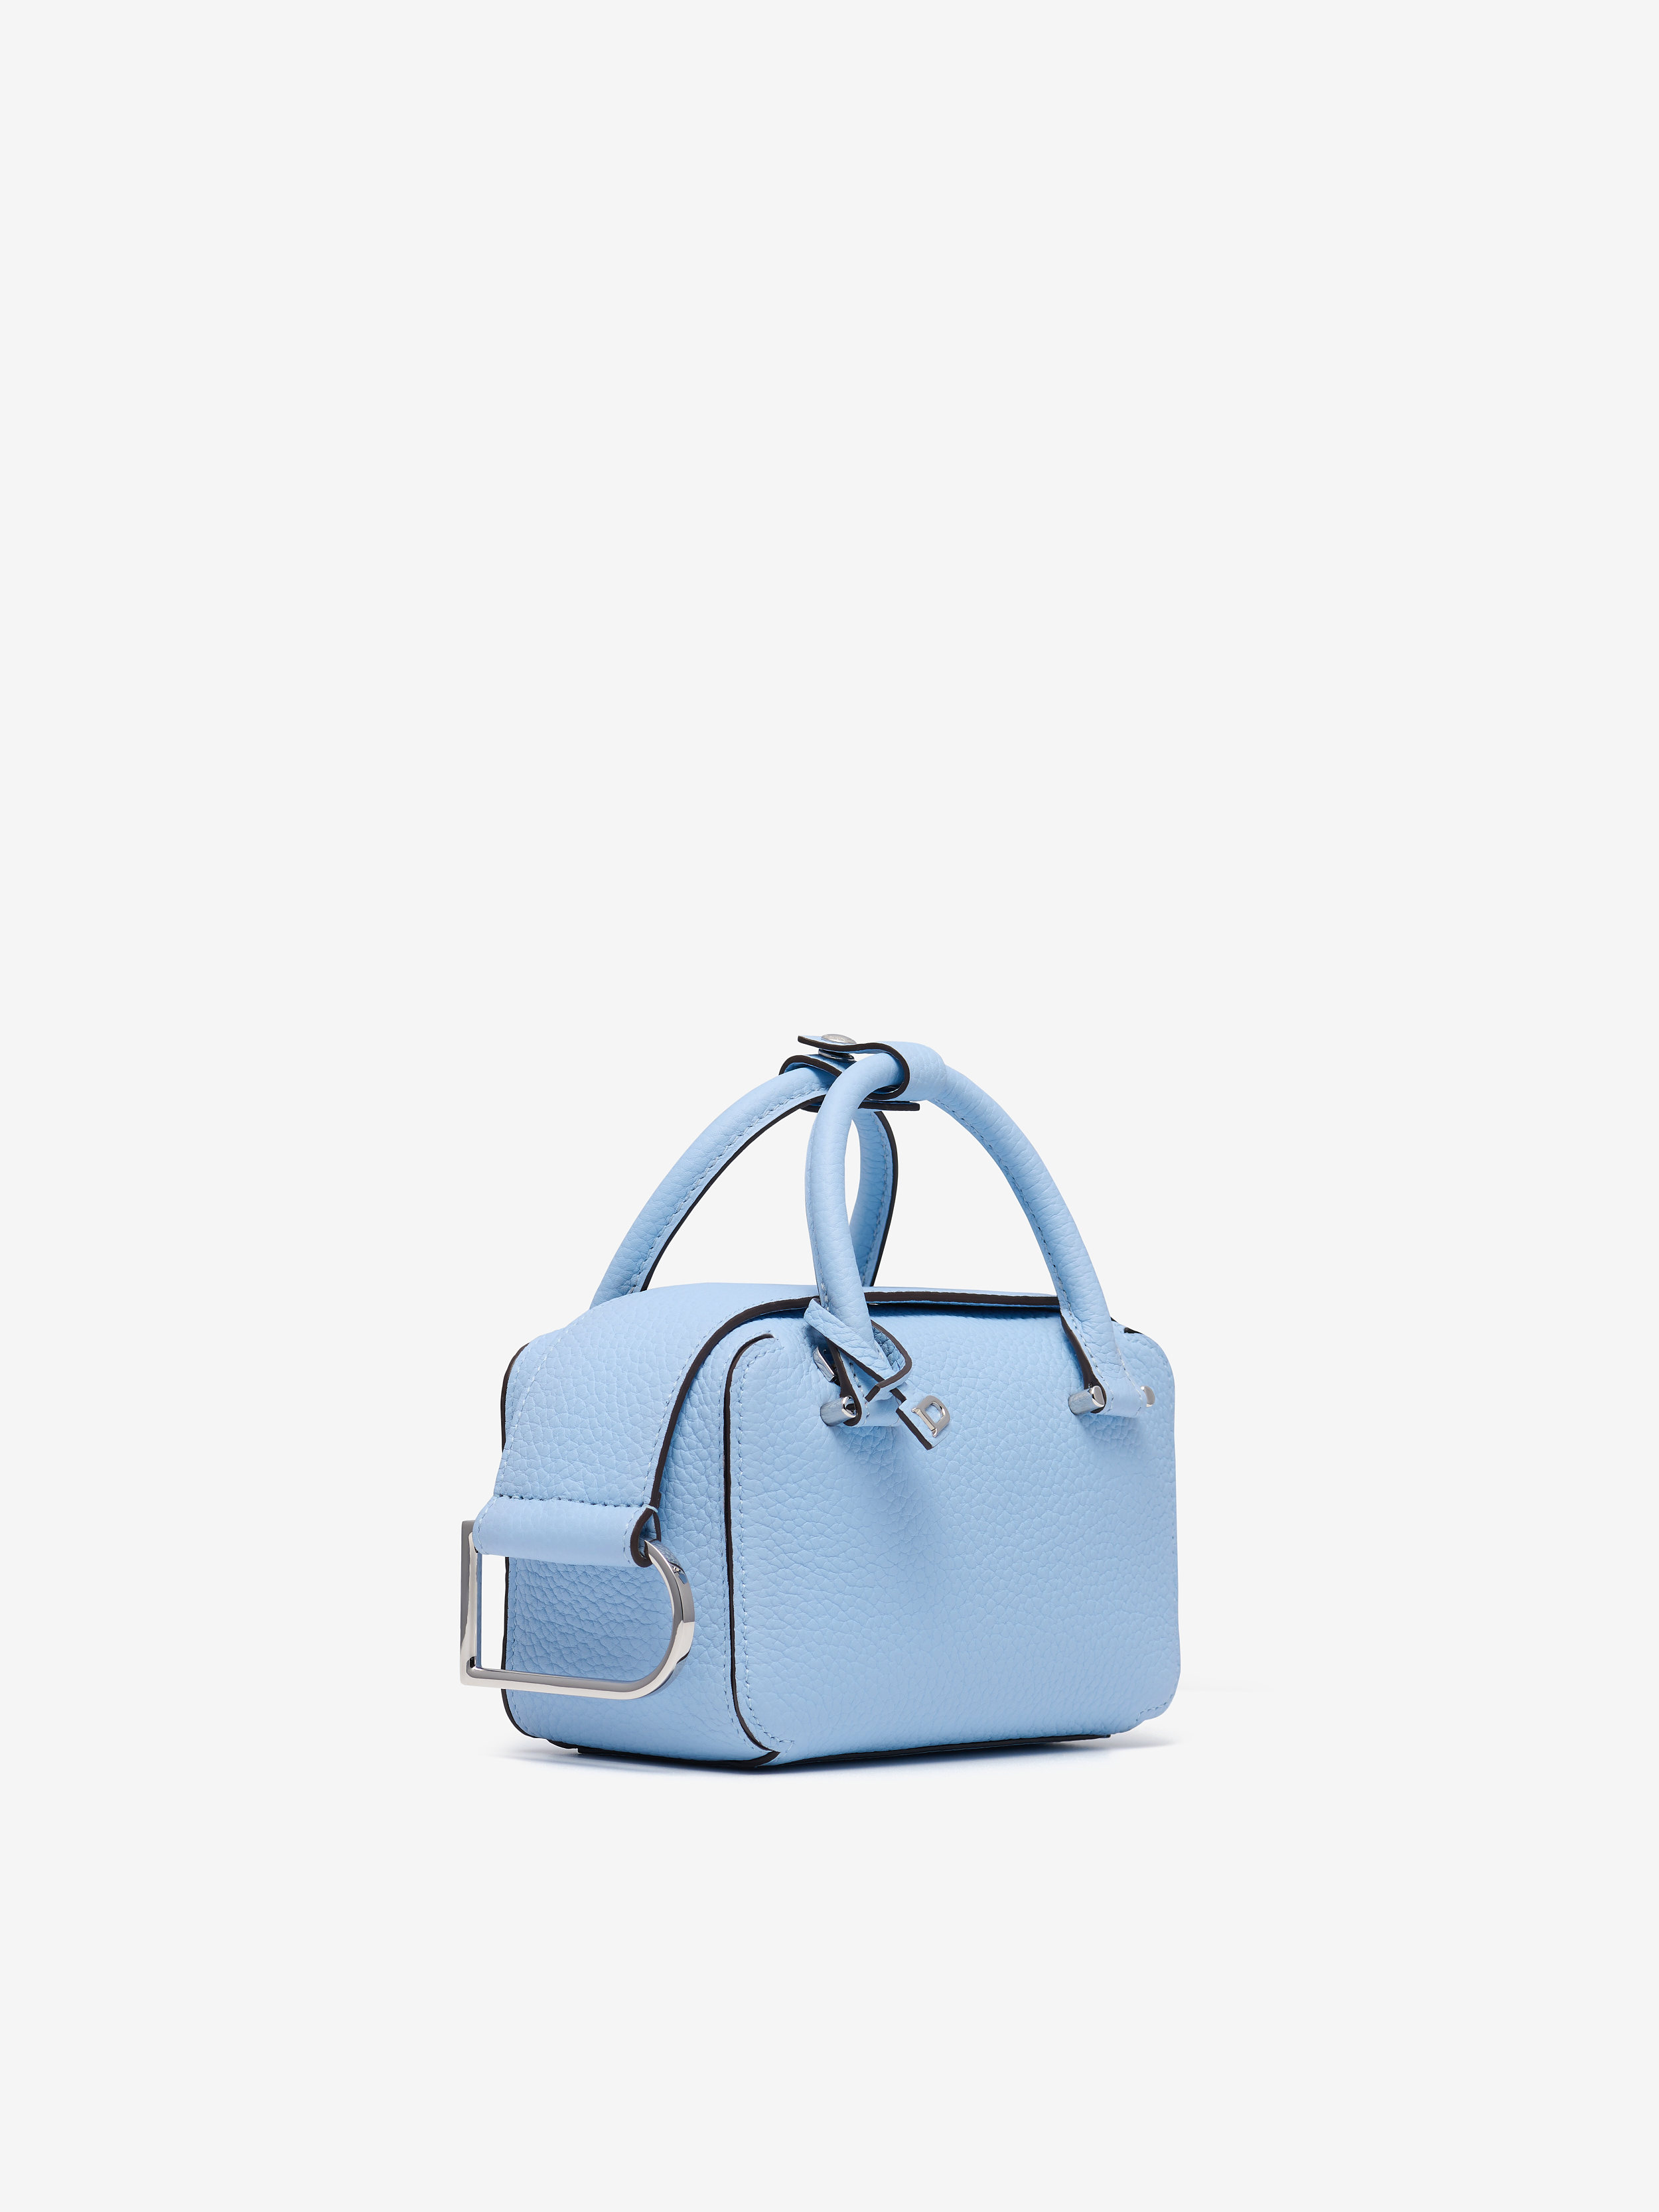 New in | Delvaux